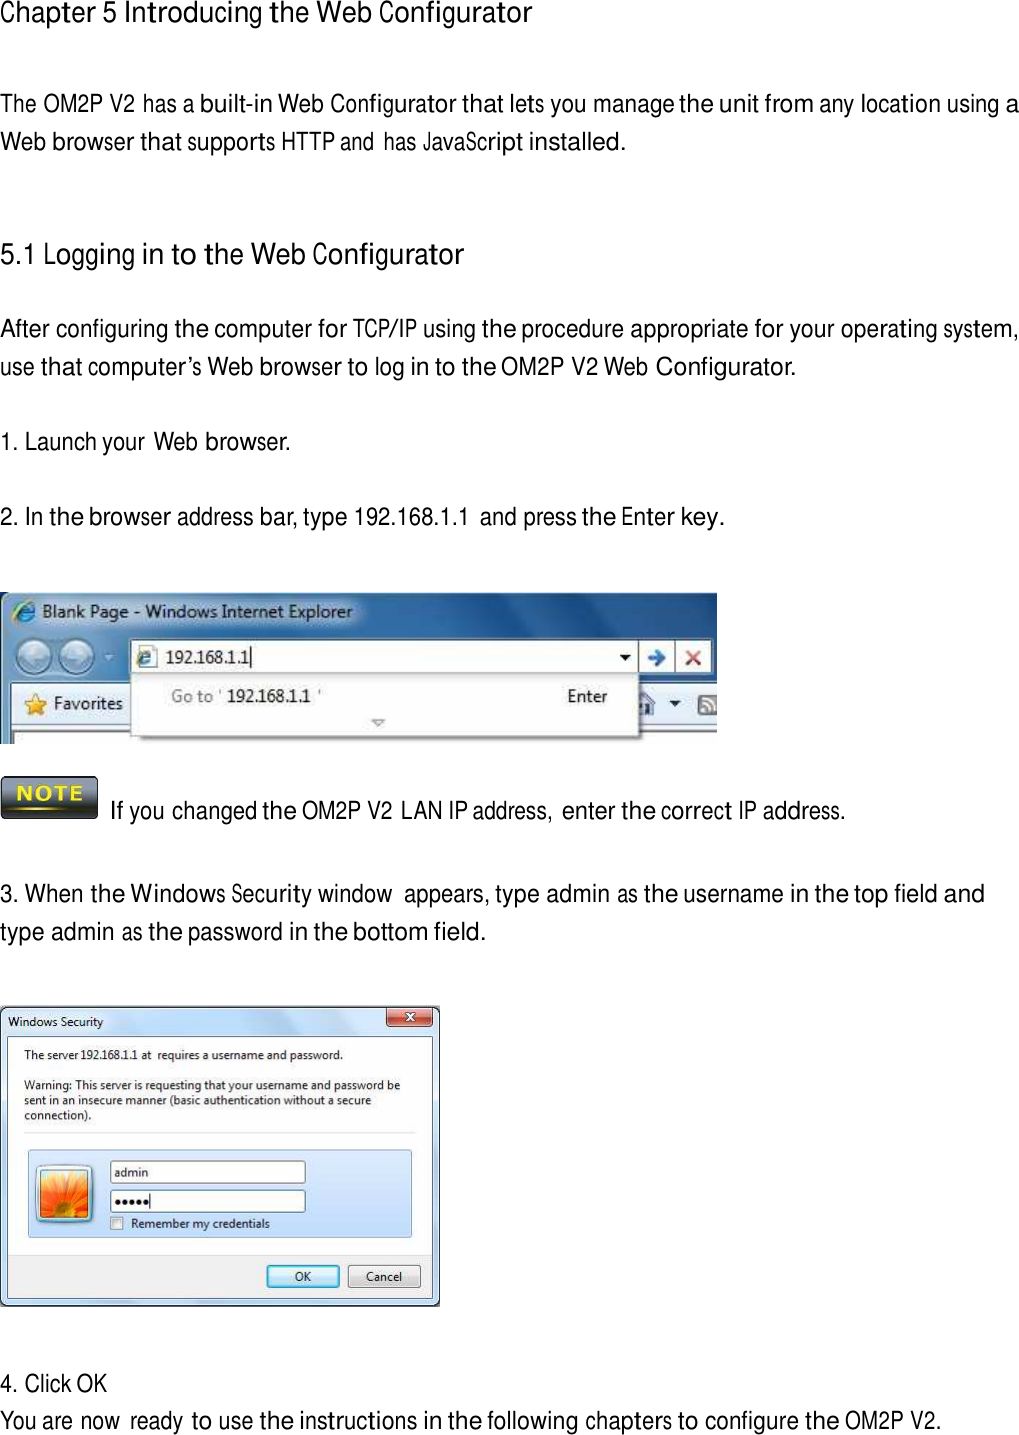 Chapter 5 Introducing the Web Configurator     The OM2P V2 has a built-in Web Configurator that lets you manage the unit from any location using a Web browser that supports HTTP and  has JavaScript installed.     5.1 Logging in to the Web Configurator   After configuring the computer for TCP/IP using the procedure appropriate for your operating system, use that computer’s Web browser to log in to the OM2P V2 Web Configurator.   1. Launch your Web browser.   2. In the browser address bar, type 192.168.1.1  and press the Enter key.       If you changed the OM2P V2 LAN IP address, enter the correct IP address.    3. When the Windows Security window  appears, type admin as the username in the top field and type admin as the password in the bottom field.        4. Click OK You are now  ready to use the instructions in the following chapters to configure the OM2P V2. 